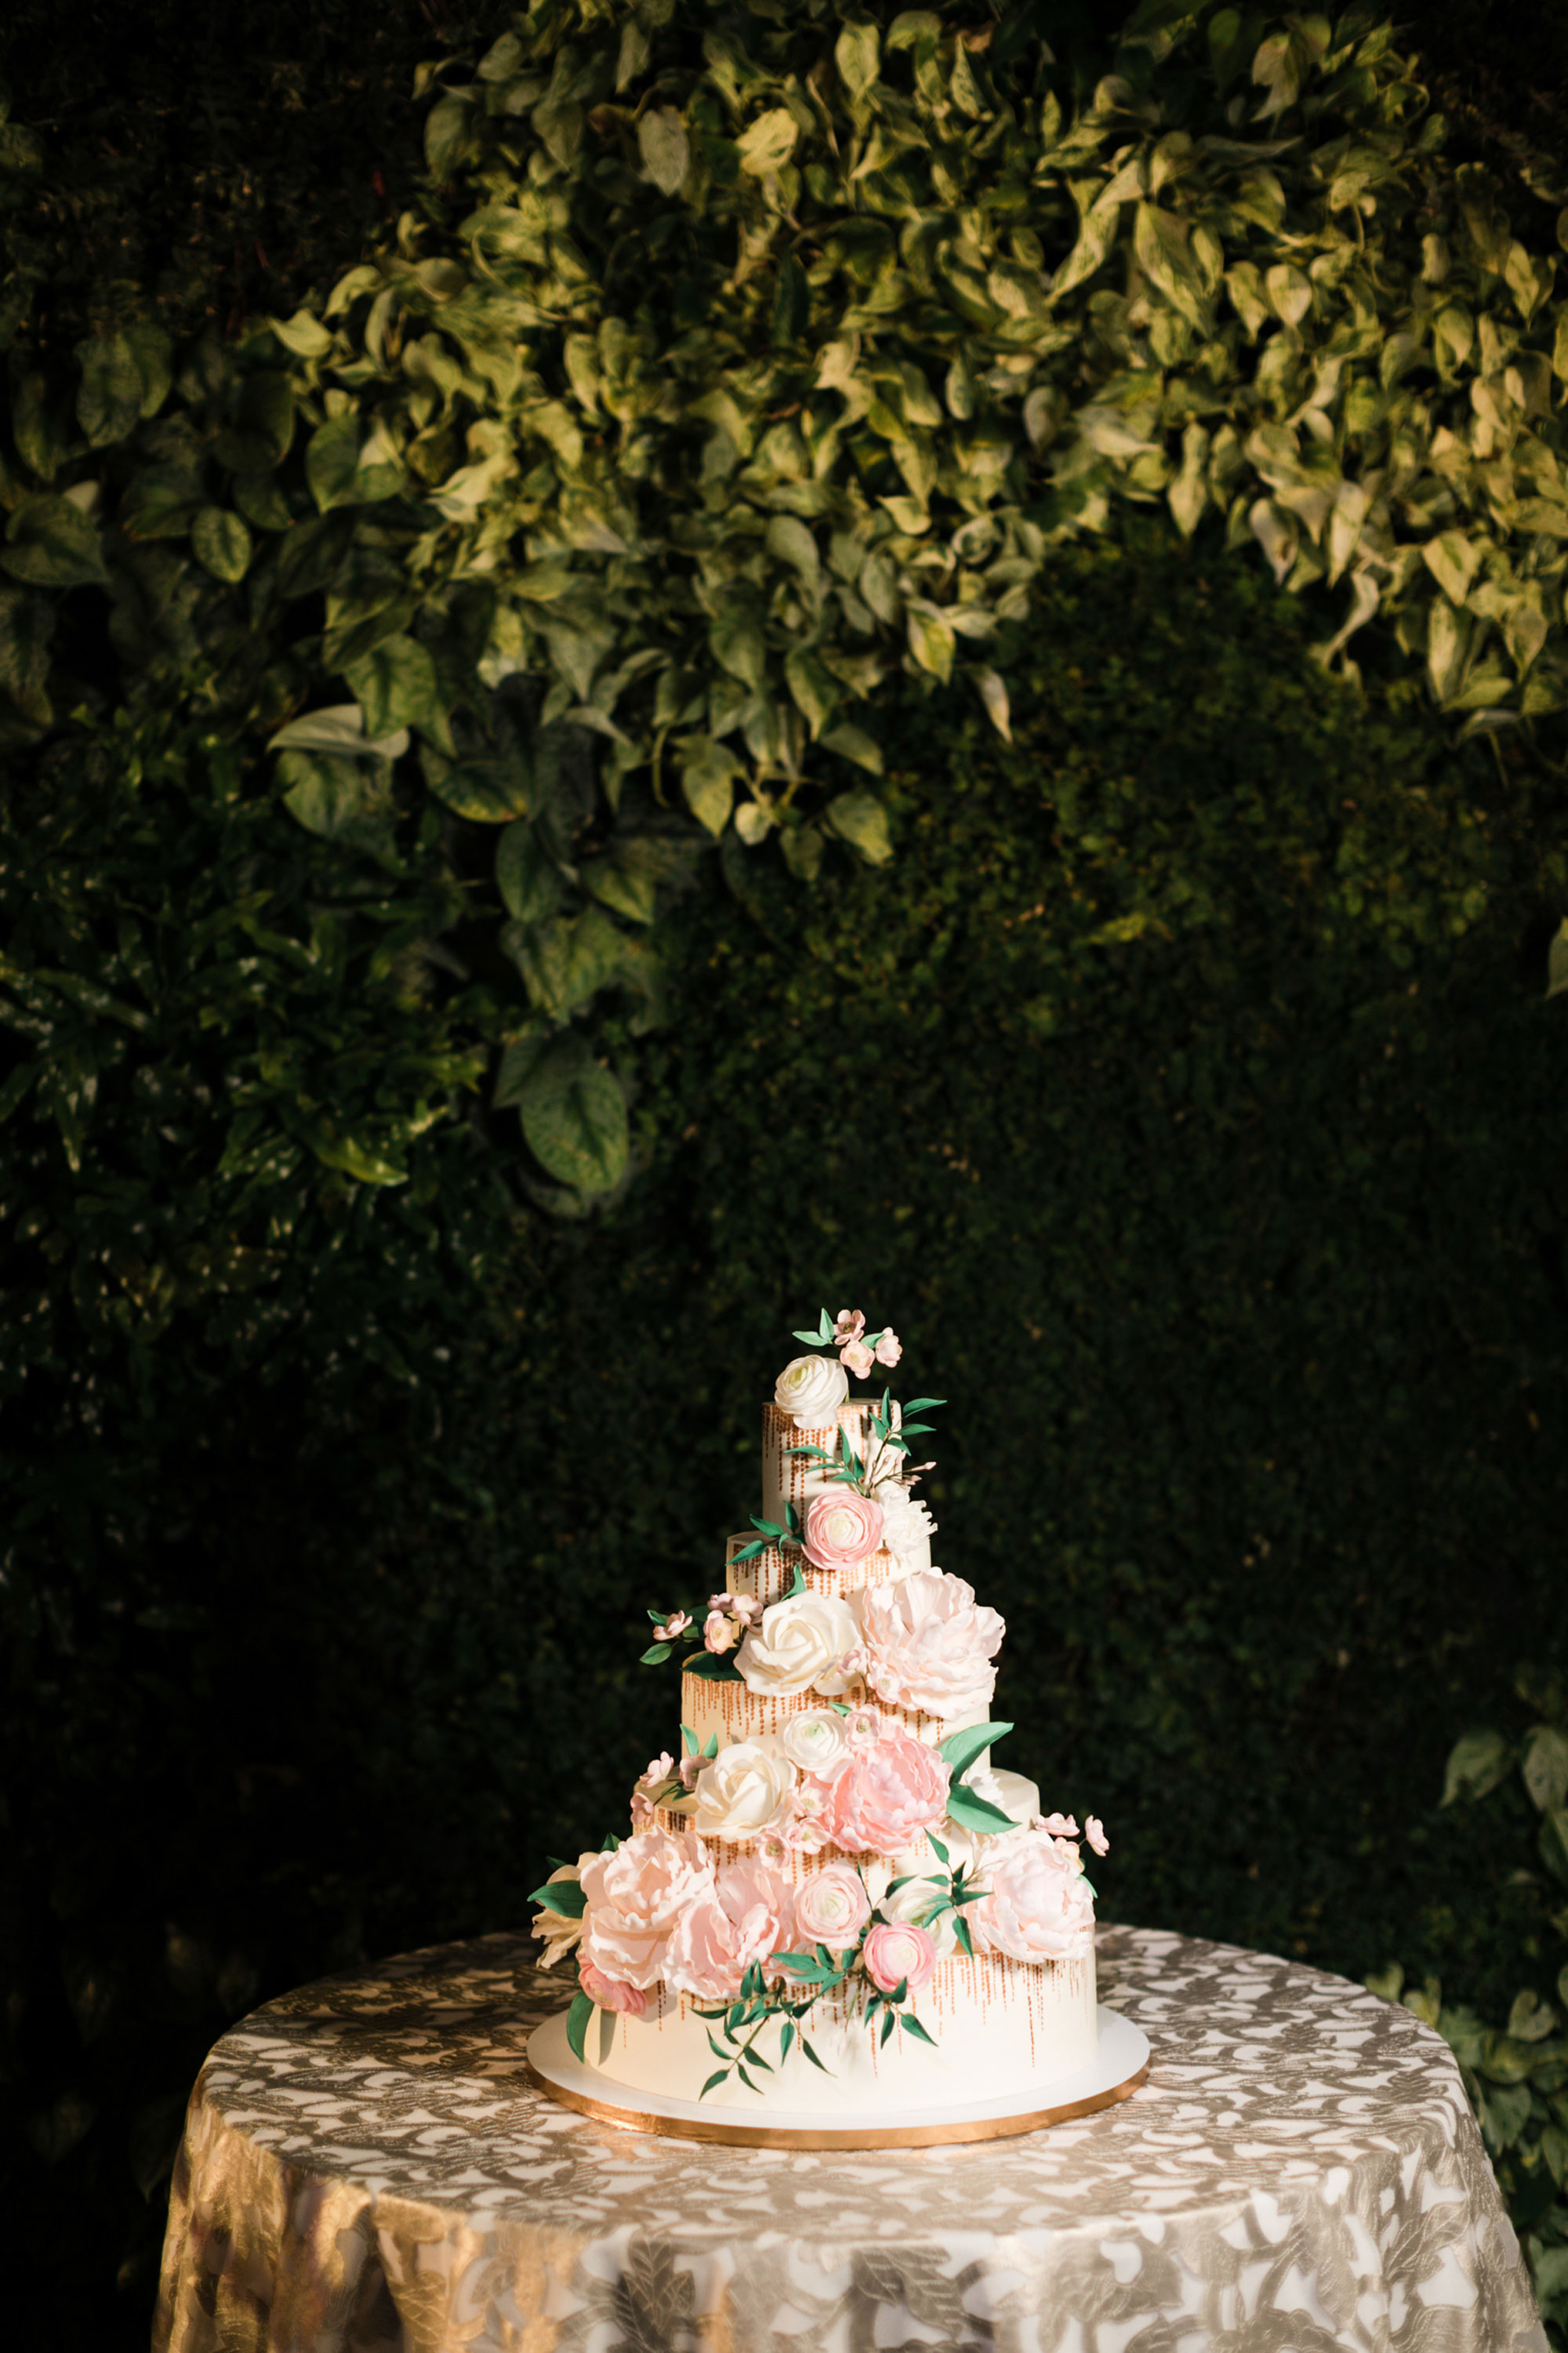 Wedding cake with sugar flowers by Nine Cakes and NJ Wedding Planner